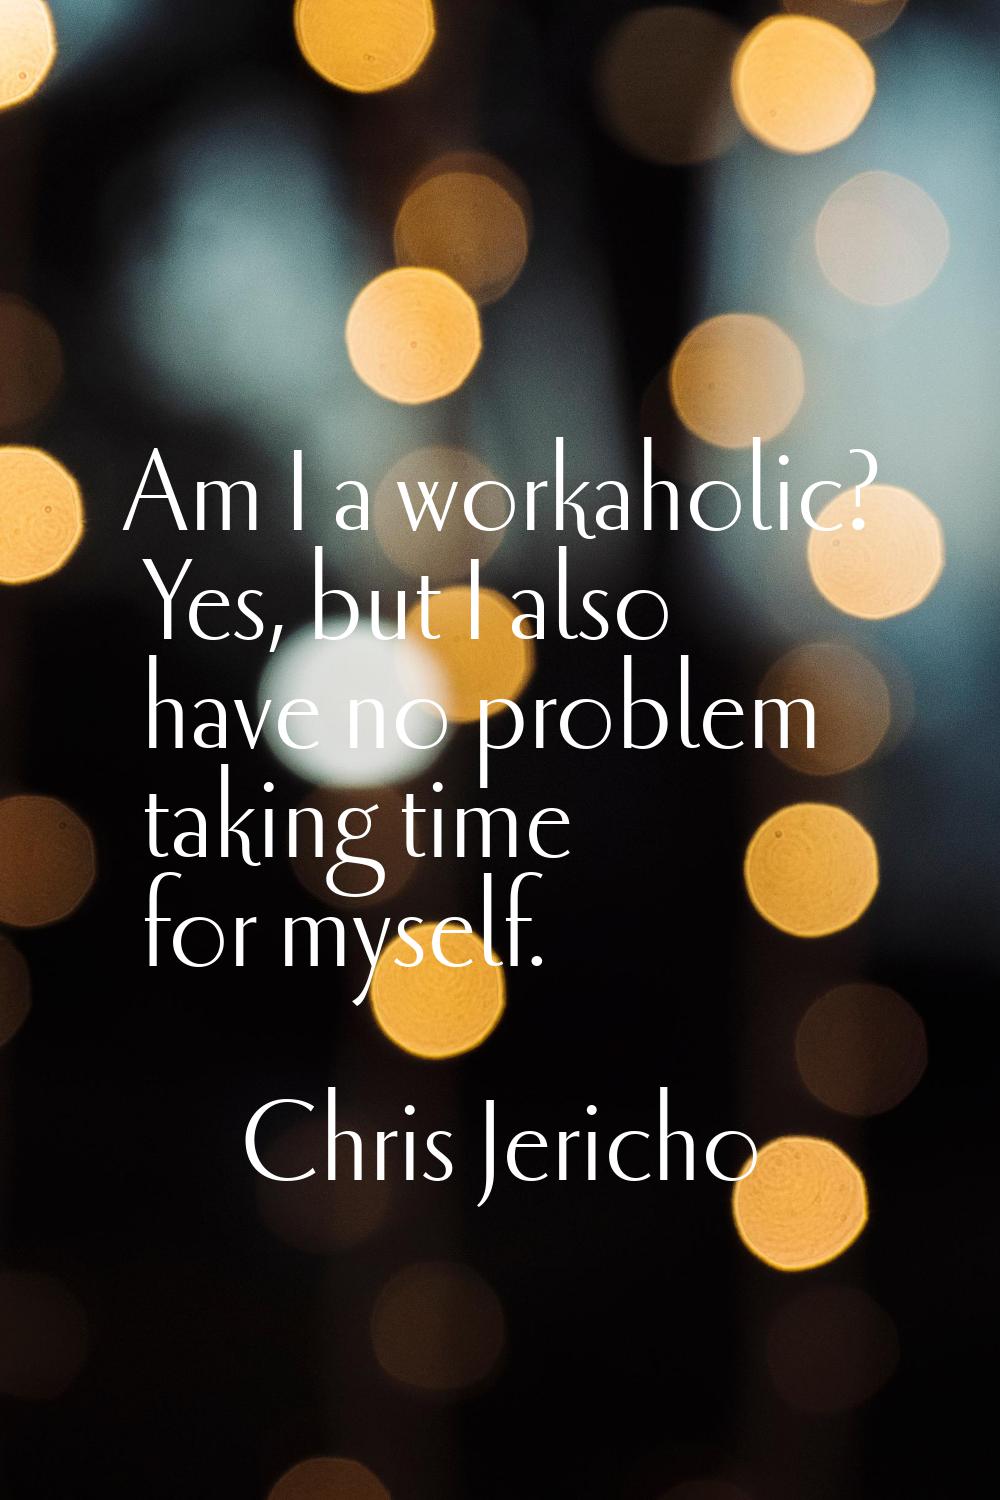 Am I a workaholic? Yes, but I also have no problem taking time for myself.